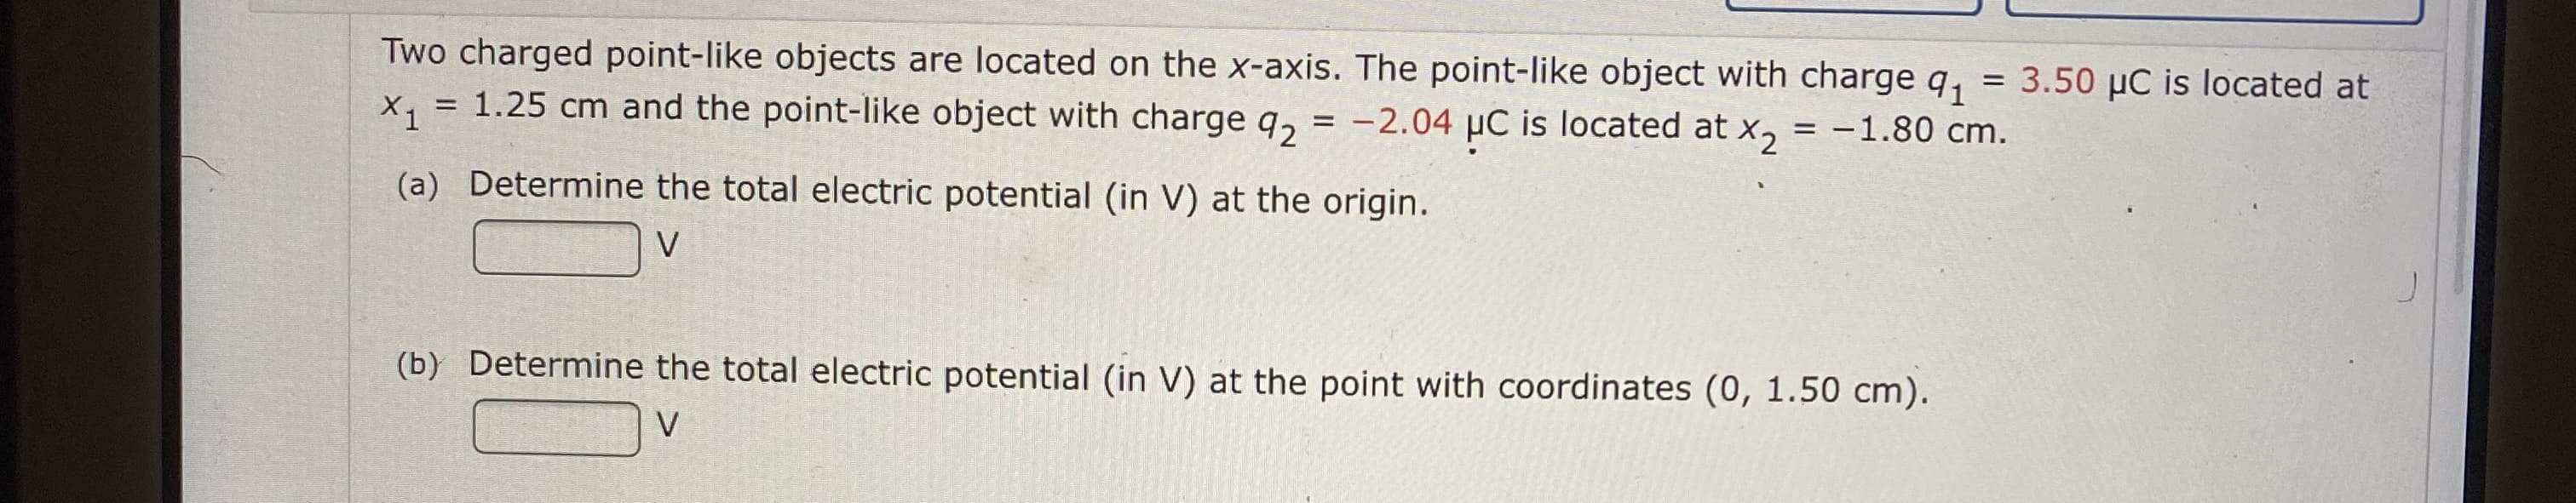 Two charged point-like objects are located on the x-axis. The point-like object with charge q,
= 1.25 cm and the point-like object with charge q, = -2.04 µC is located at x, = -1.80 cm.
= 3.50 µC is located at
X, =
%3D
(a) Determine the total electric potential (in V) at the origin.
(b) Determine the total electric potential (in V) at the point with coordinates (0, 1.50 cm).
V
